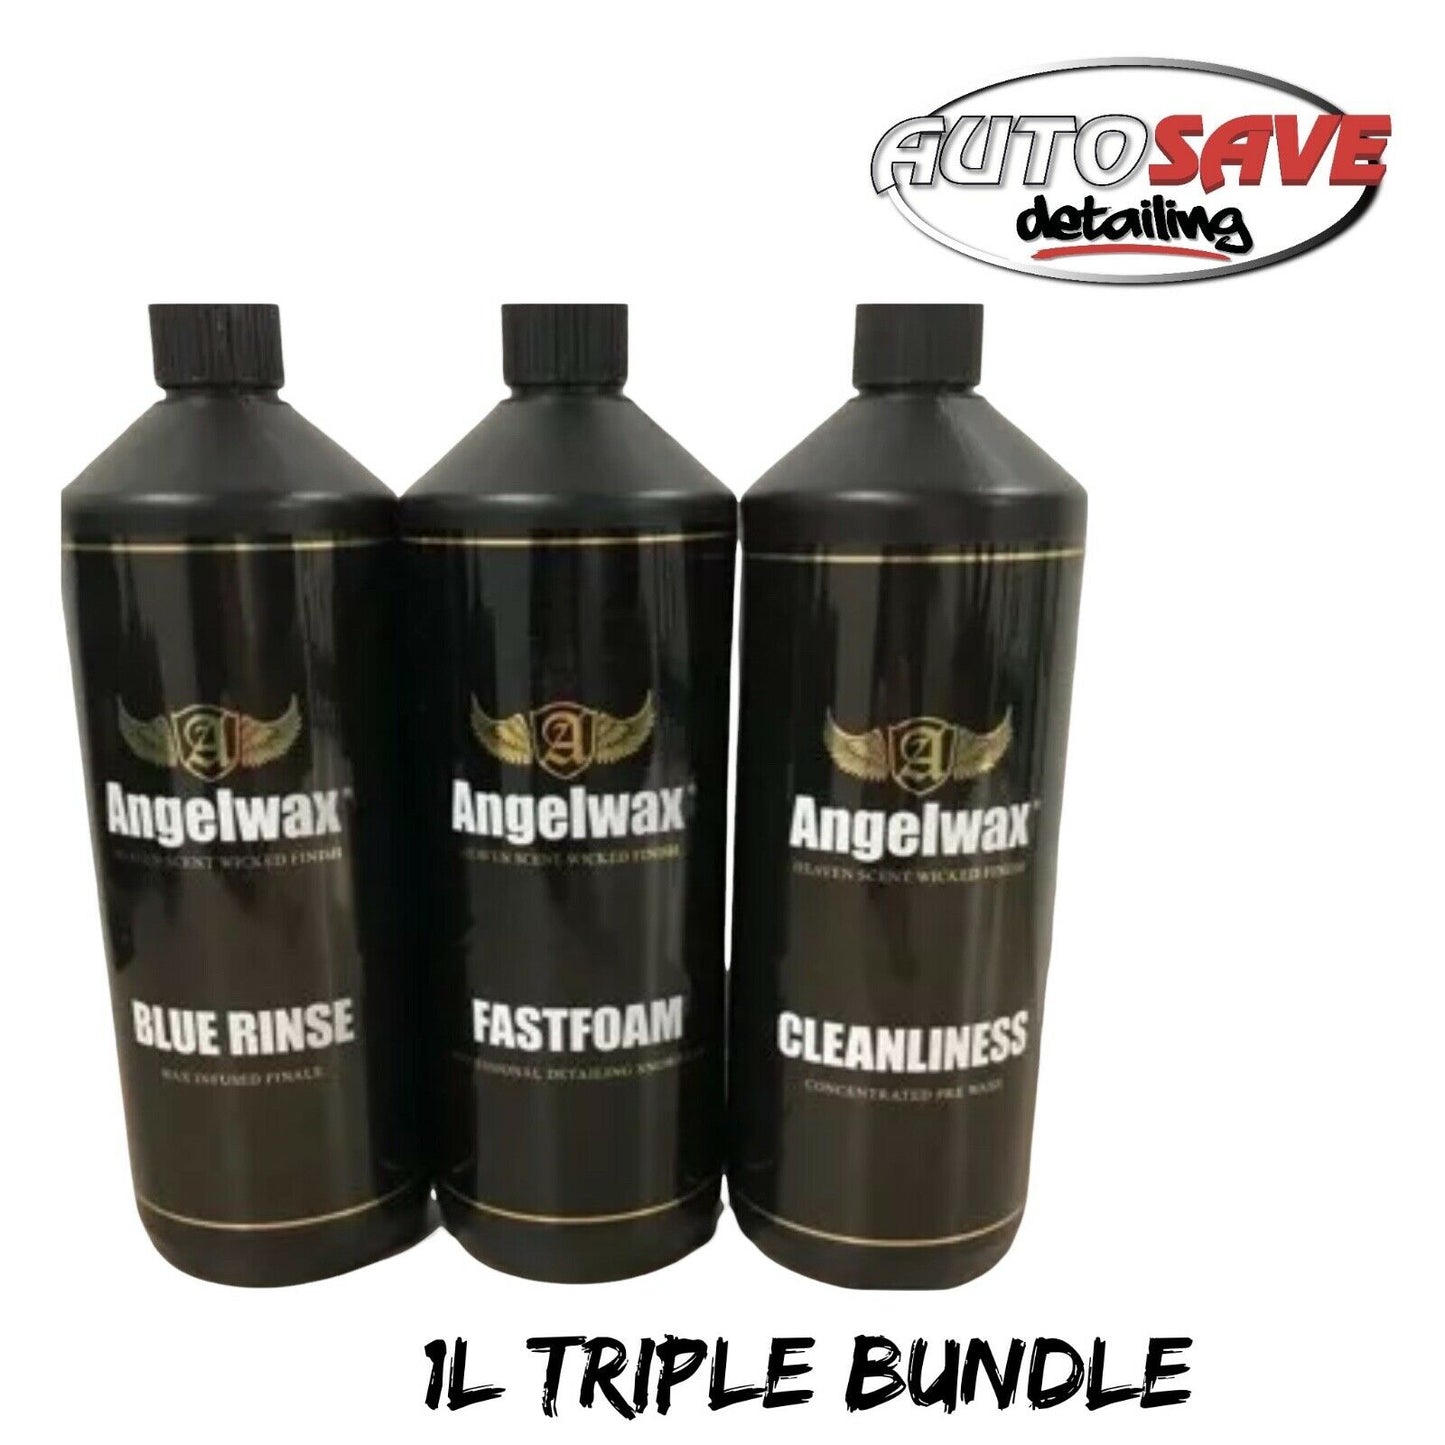 Angelwax BLUE RINSE , FASTFOAM and CLEANLINESS 1L Triple Bundle Great Buy